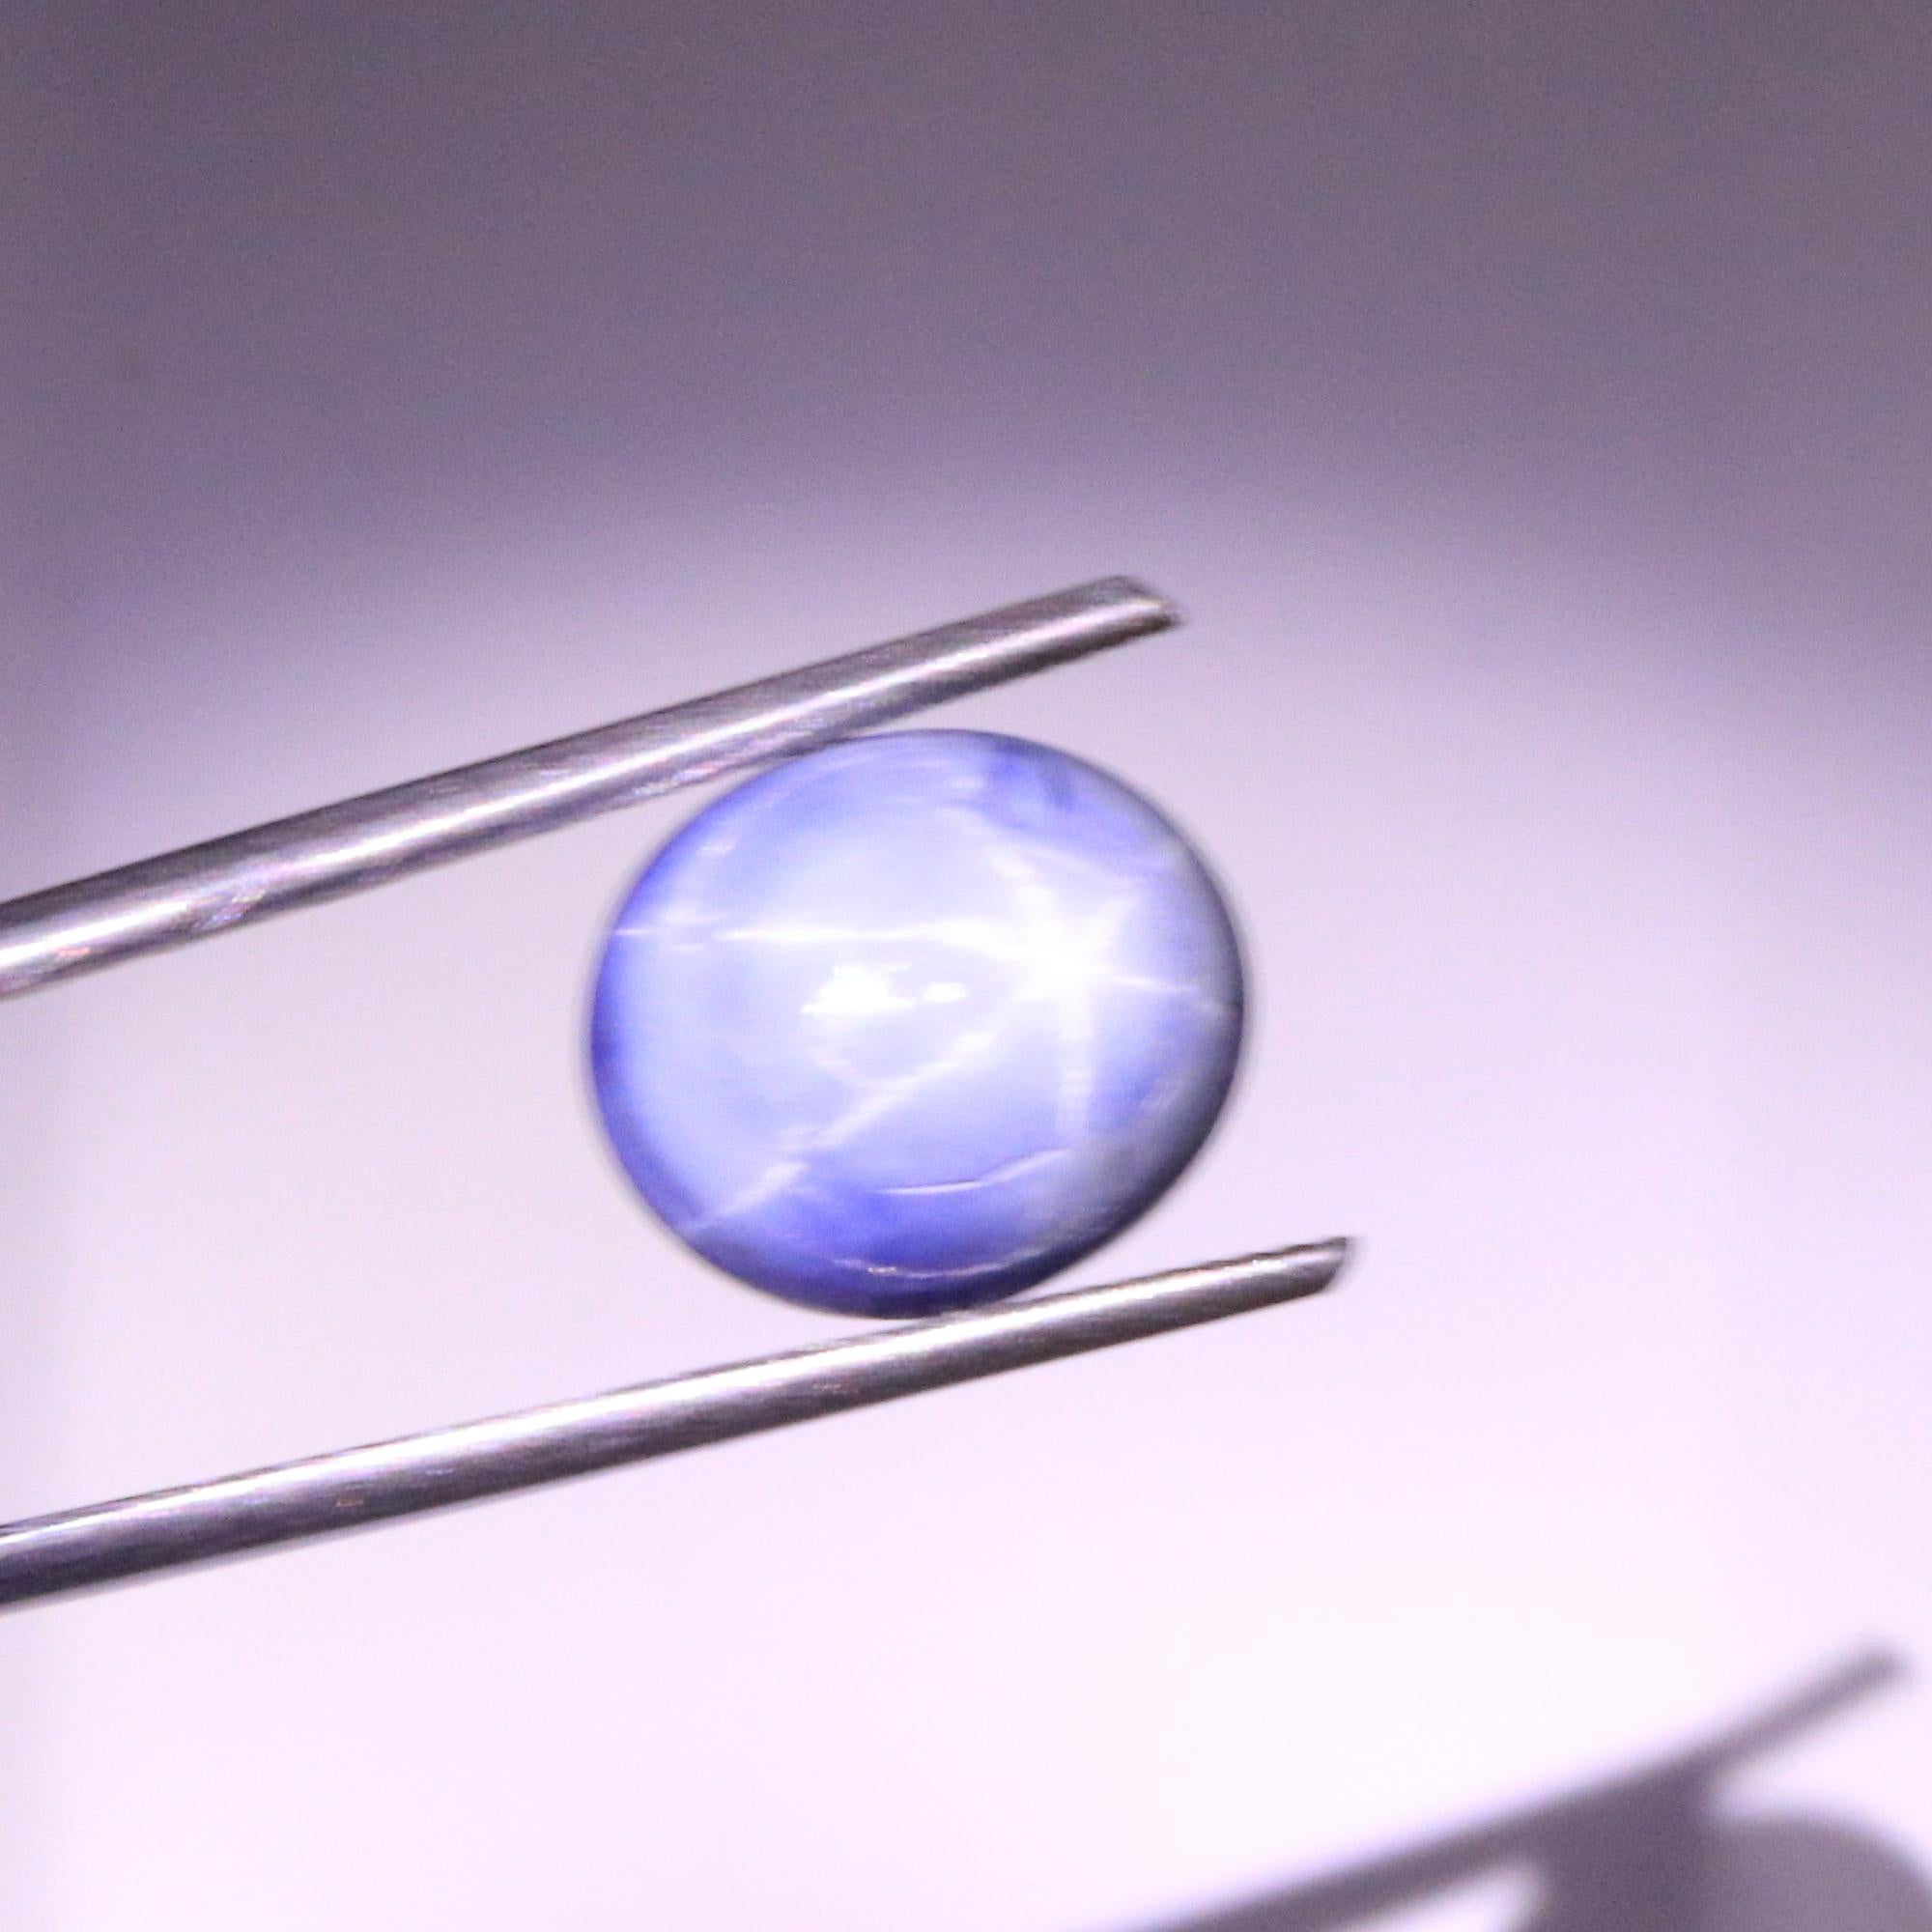 Cabochon Certified Unheated Star Sapphire - 10.76ct For Sale